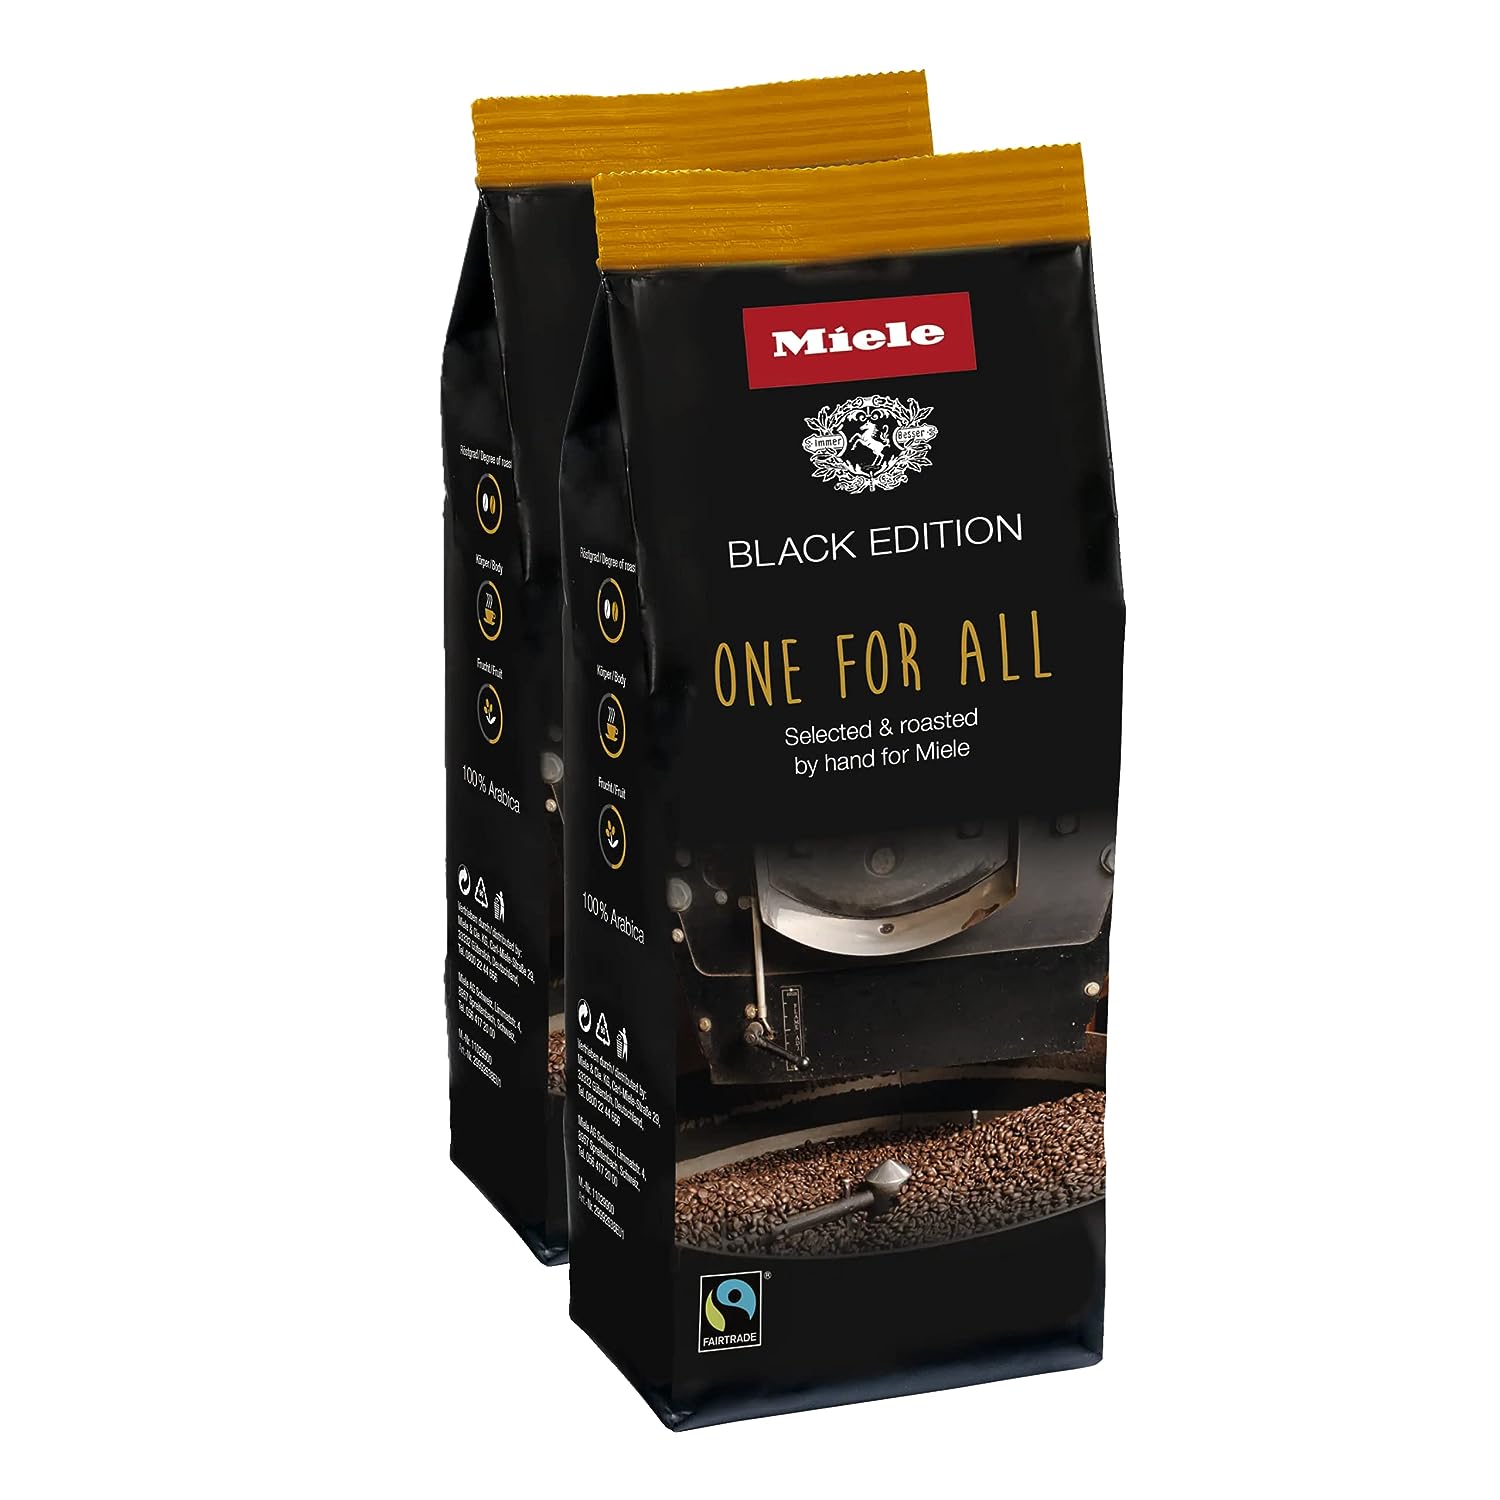 Miele Black Edition One For All Hand-Selected & Hand-Roasted Whole Coffee Beans - USDA Organic, Fair Trade Certified , 2 Pack